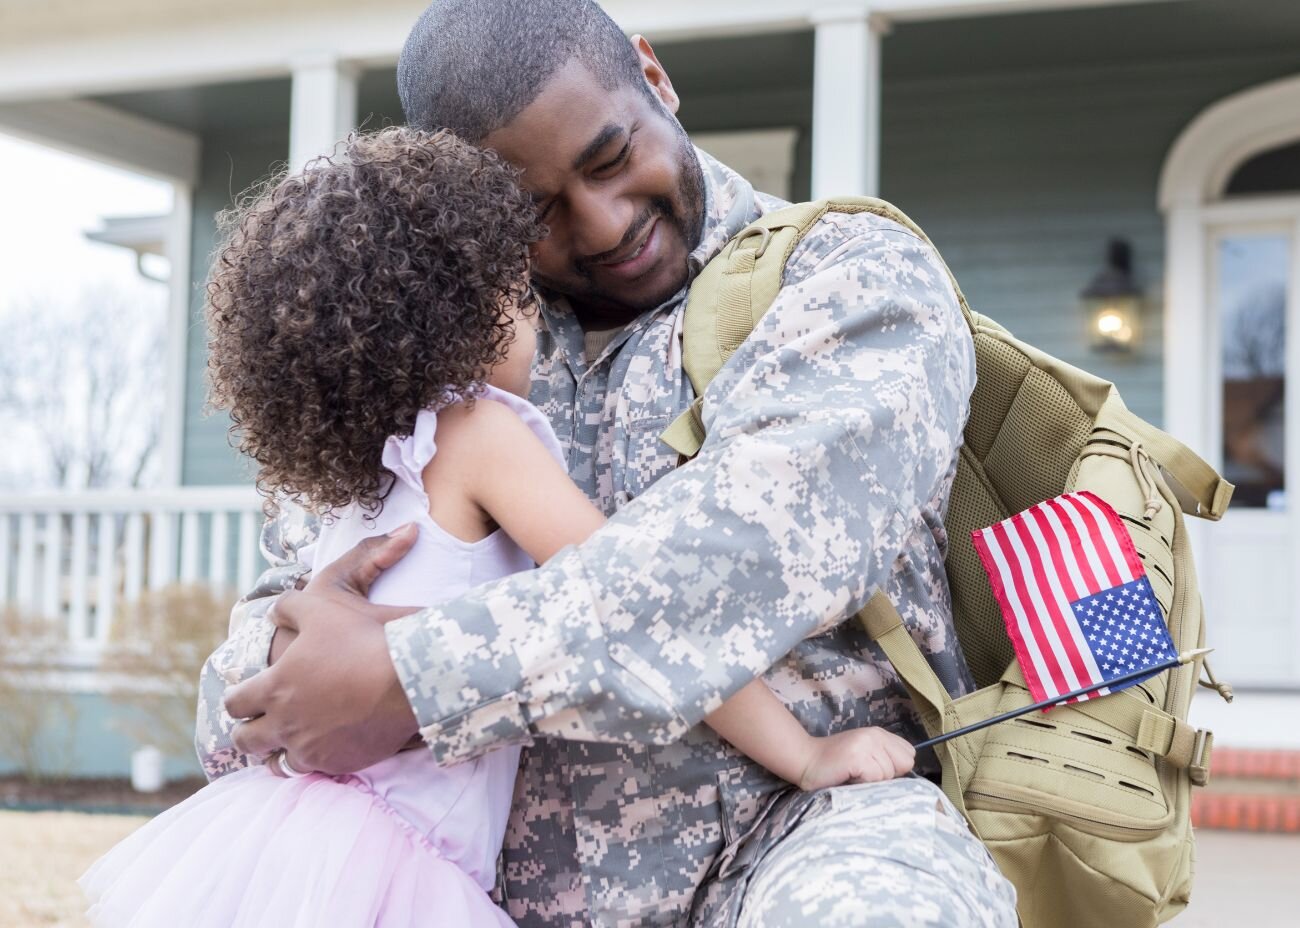 A military dad hugs his young daughter outside their home after returning from deployment.